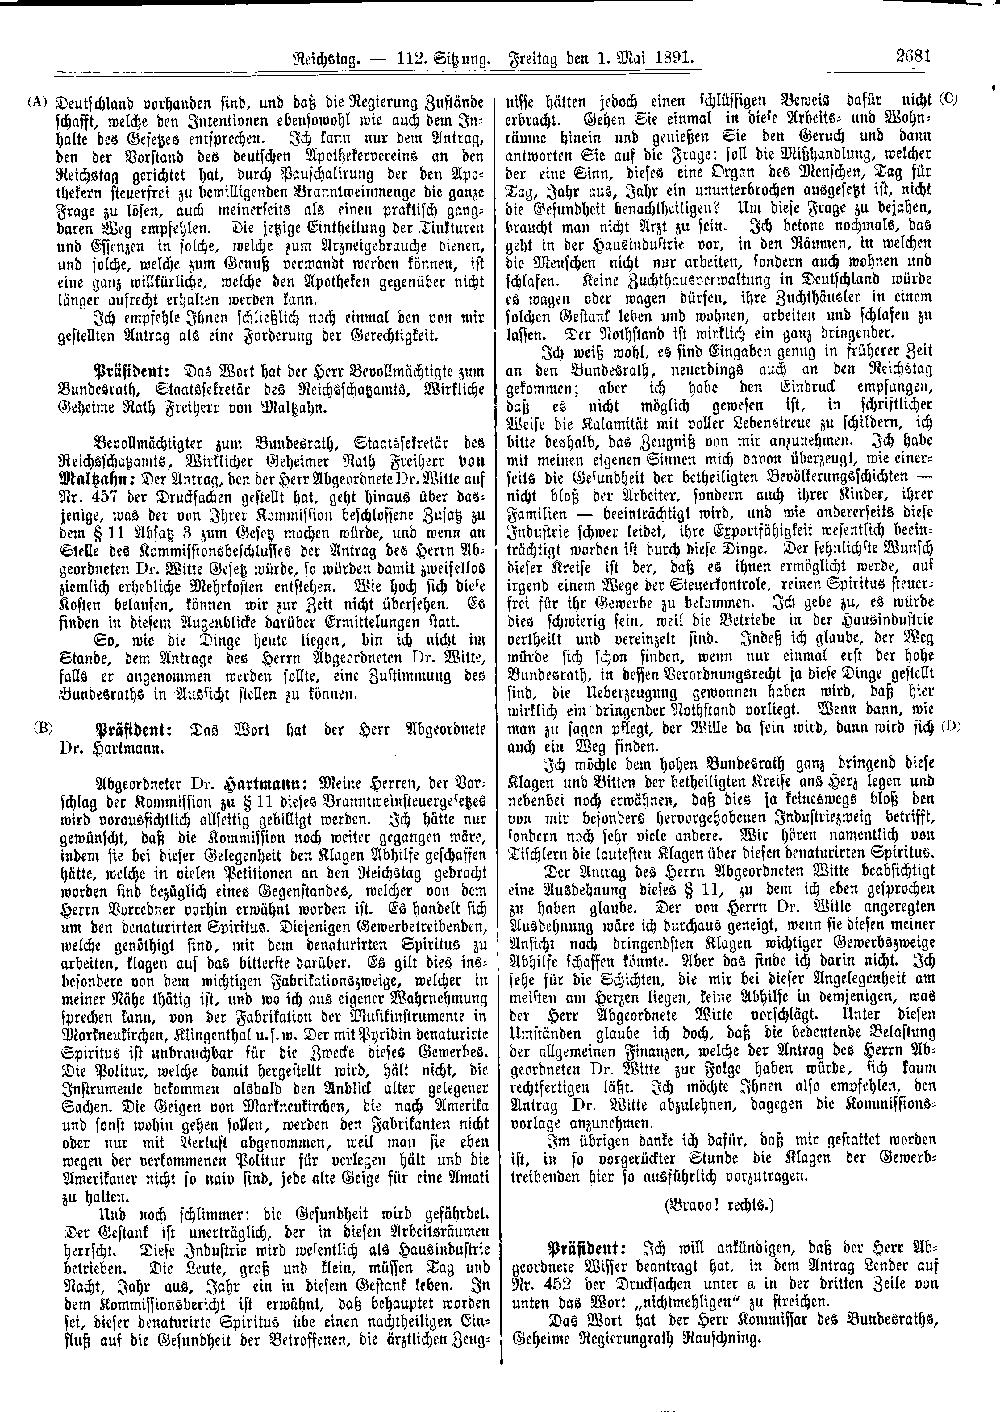 Scan of page 2681